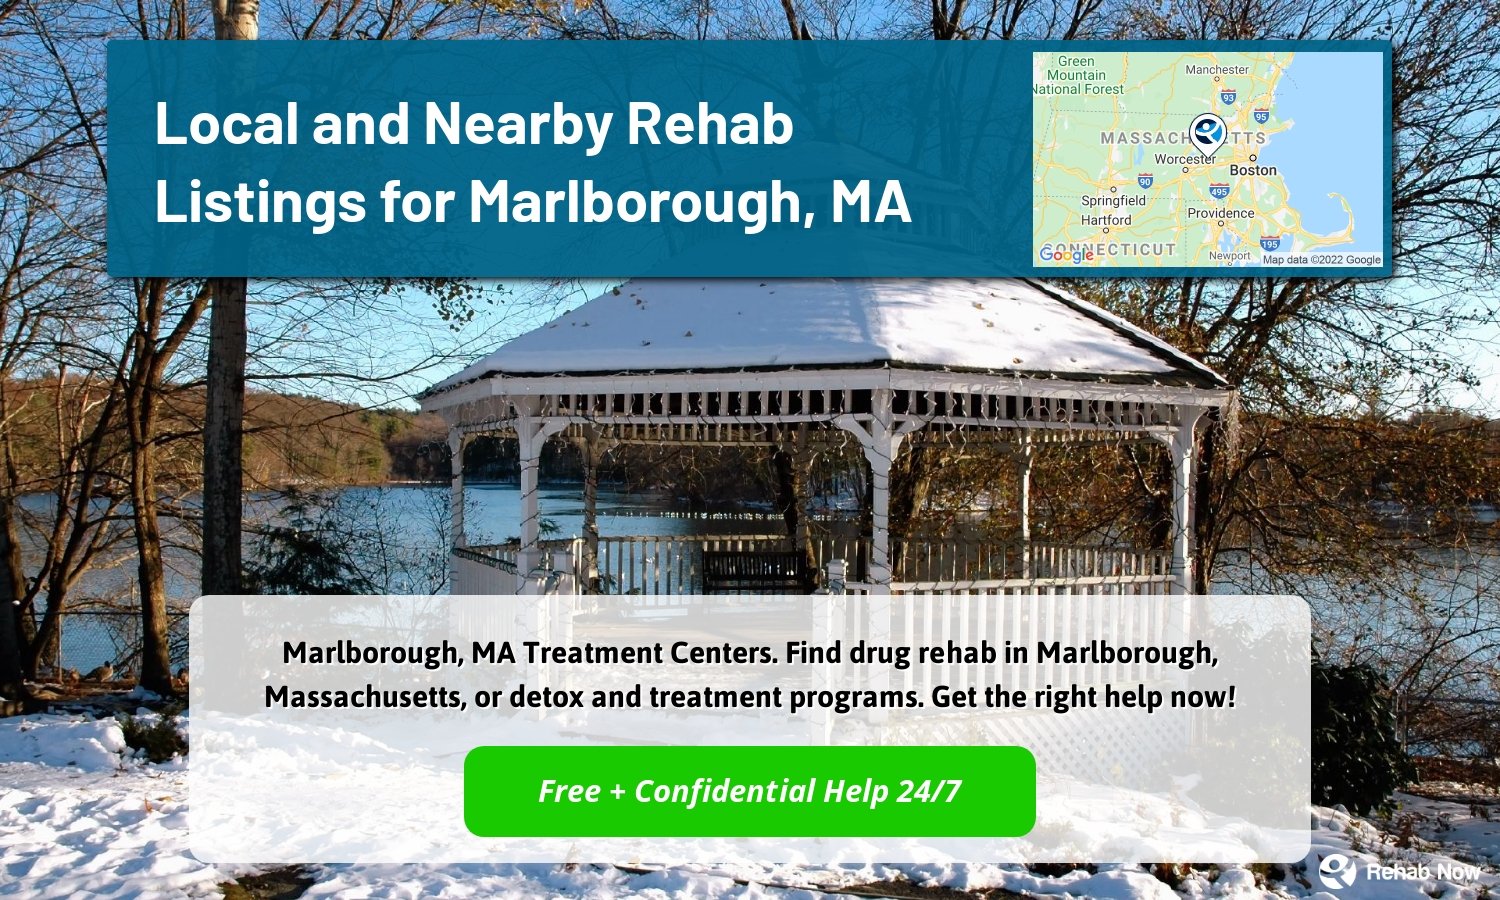 Marlborough, MA Treatment Centers. Find drug rehab in Marlborough, Massachusetts, or detox and treatment programs. Get the right help now!